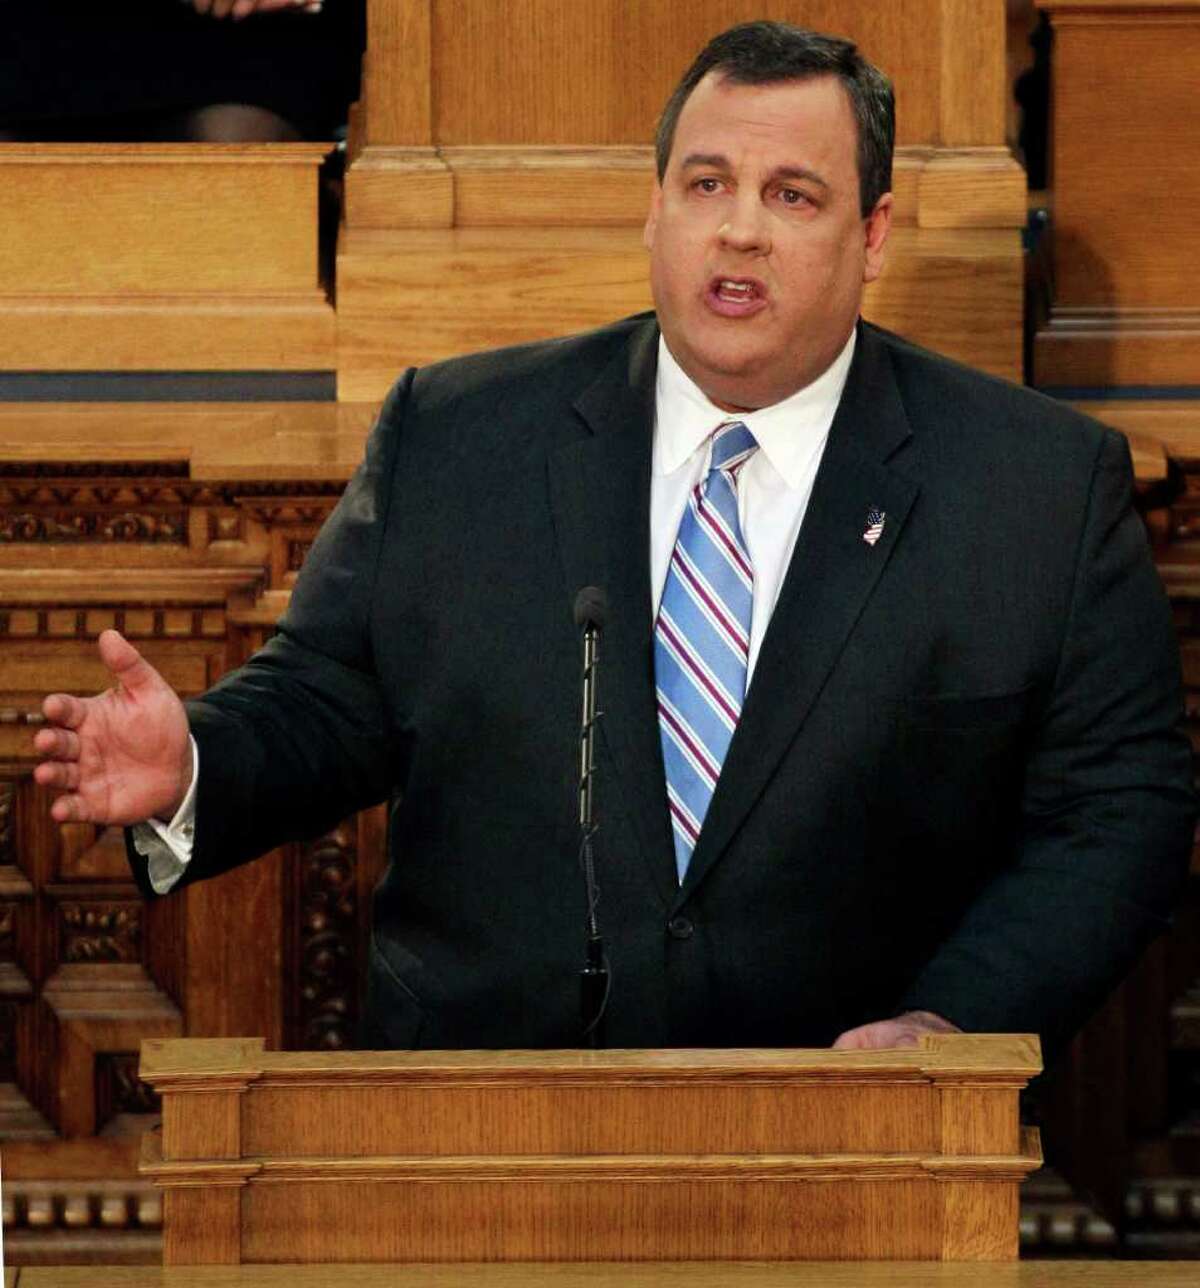 FILE - In this Feb. 21, 2012 file photo, New Jersey Gov. Chris Christie delivers his budget address in Trenton, N.J. Civil rights groups in the Northeast pressed Thursday, March 1, 2012, for an investigation of the New York Police Department's secret surveillance of Muslims in the region, a day after New Jersey Gov. Chris Christie assailed the agency for having a ?“masters of the universe?” mentality and acting either out of arrogance or paranoia.(AP Photo/Mel Evans, File)